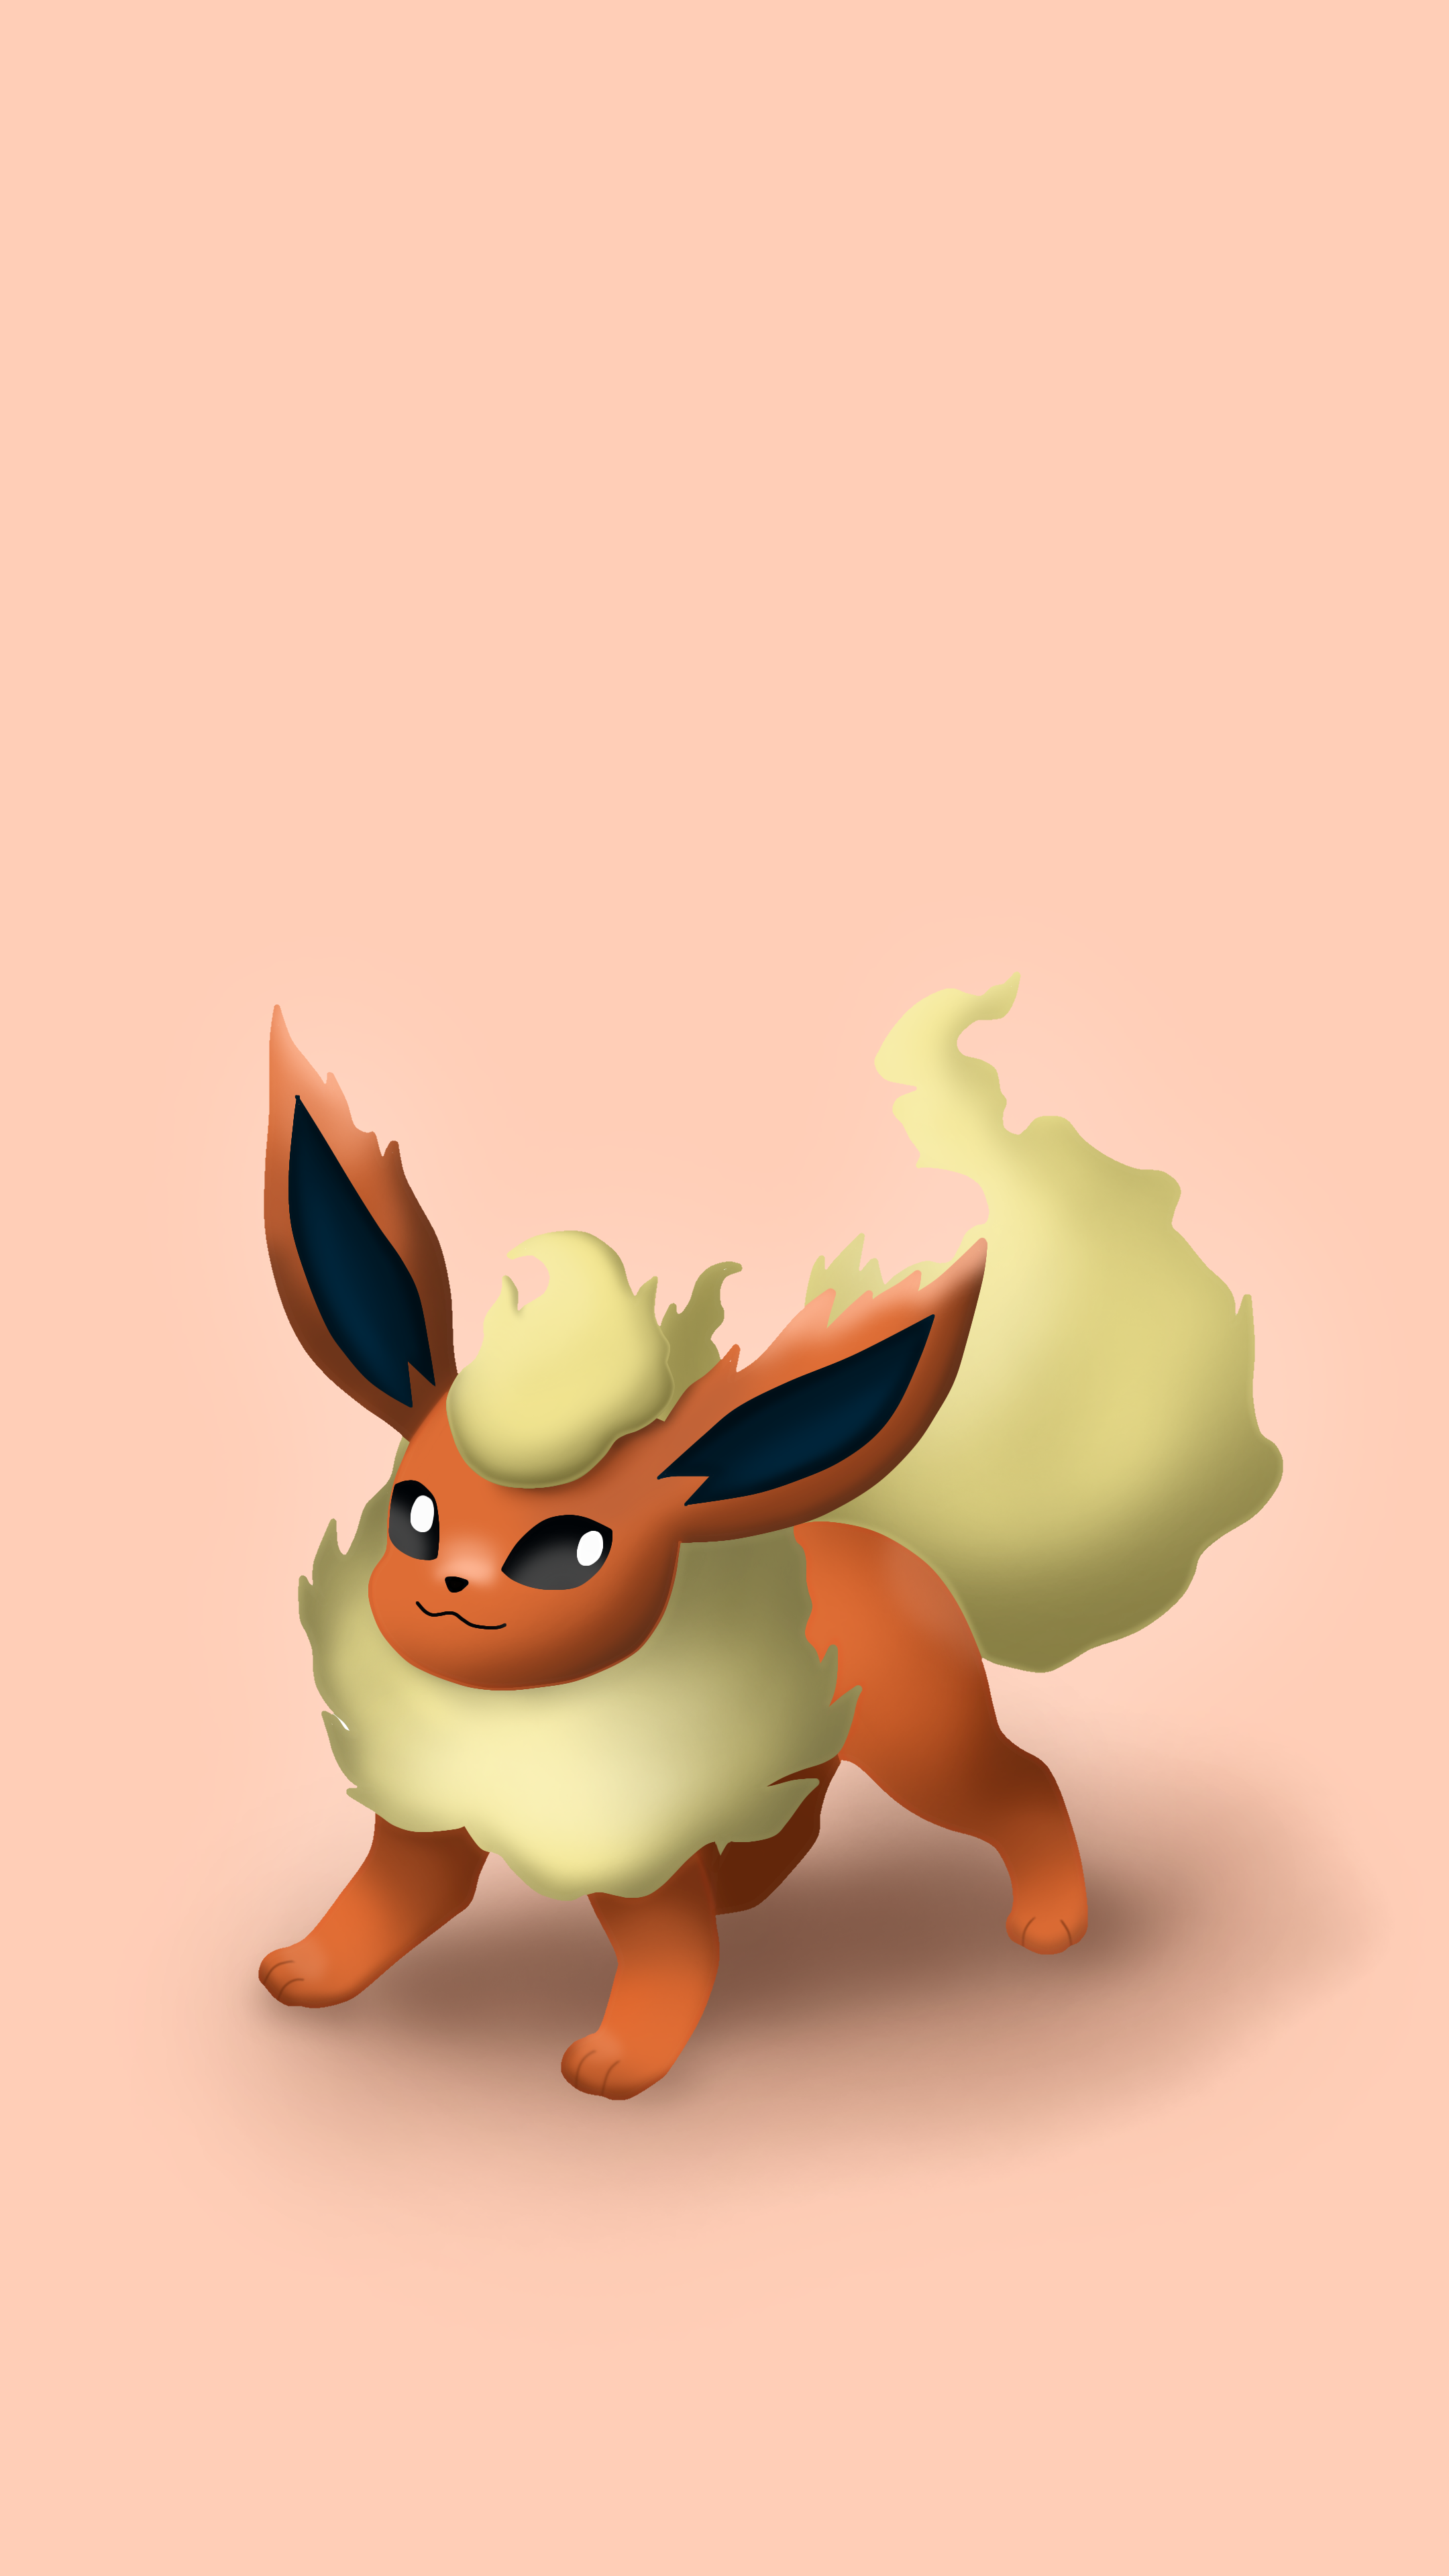 I made a 3D styled Flareon wallpaper for myself! Pls share ur criticism!